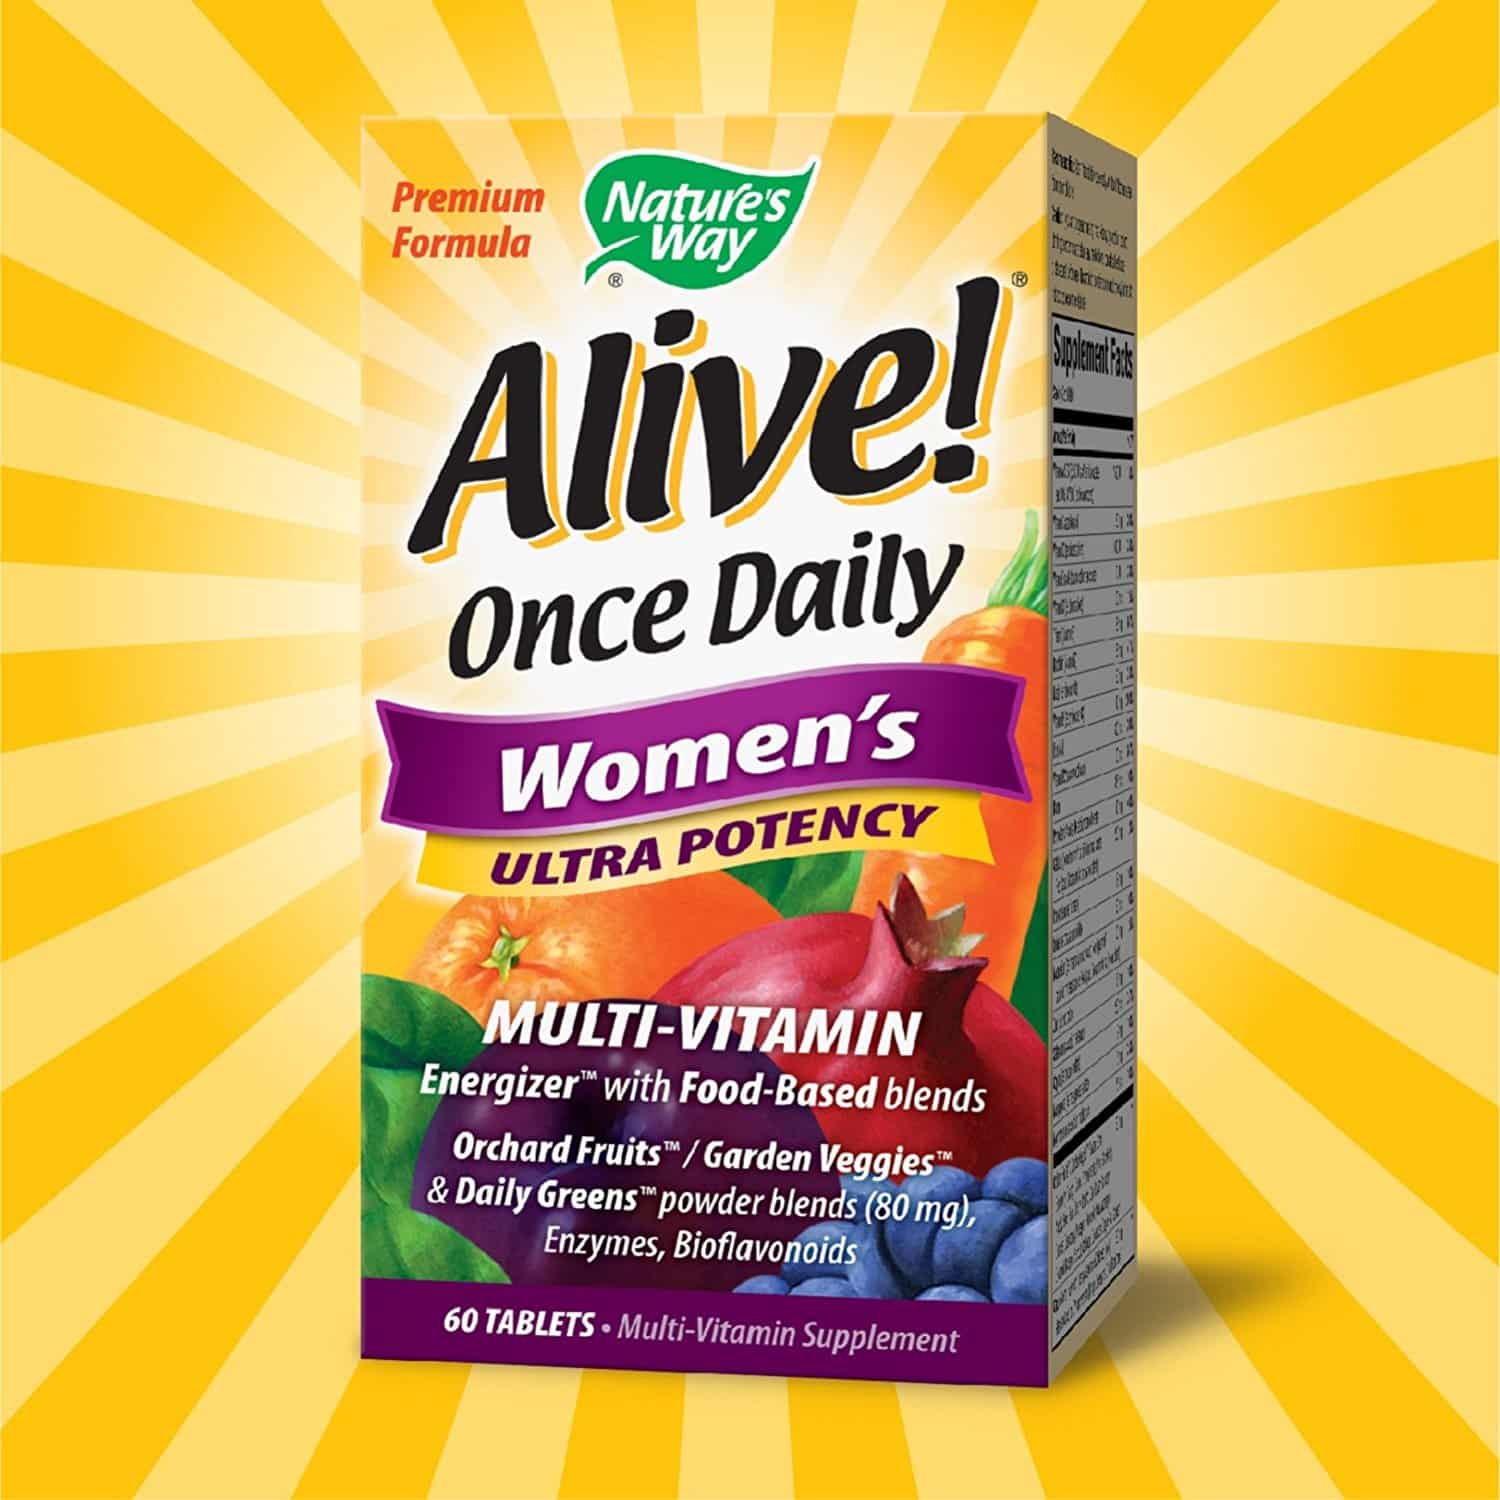 Alive! Once Daily Women’s Ultra Potency Review